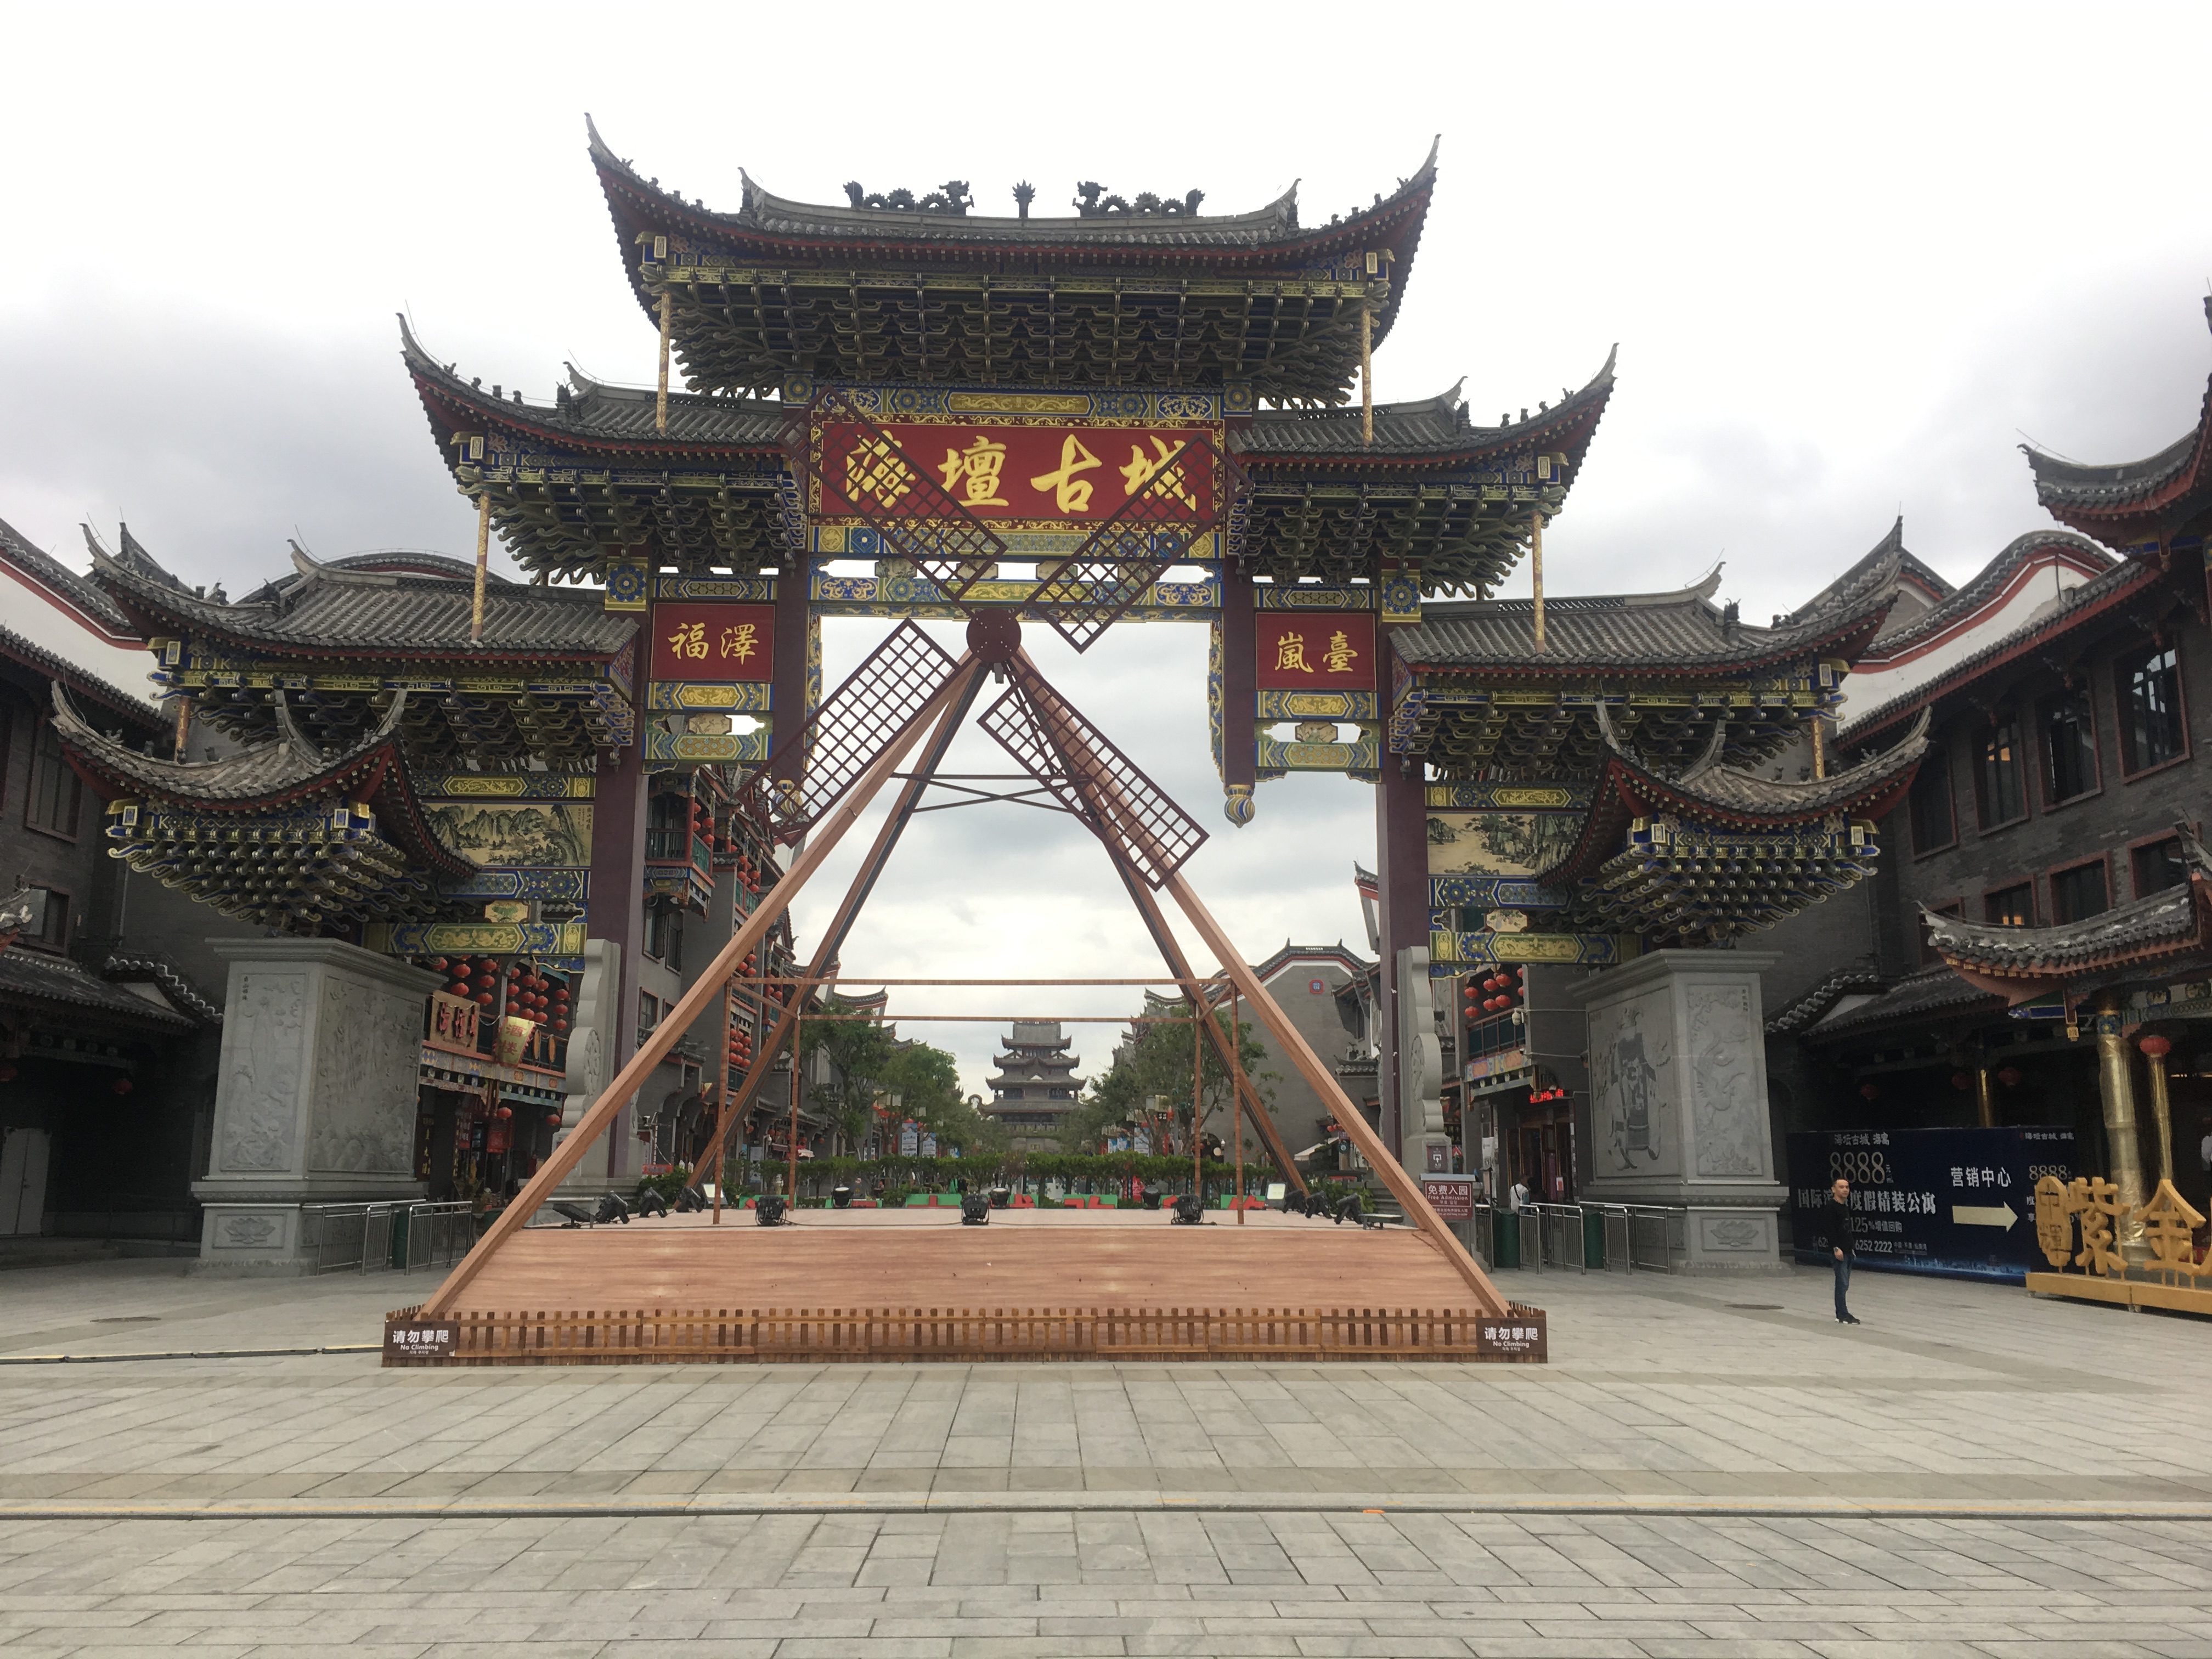 The main entrance to the theme park of Old China